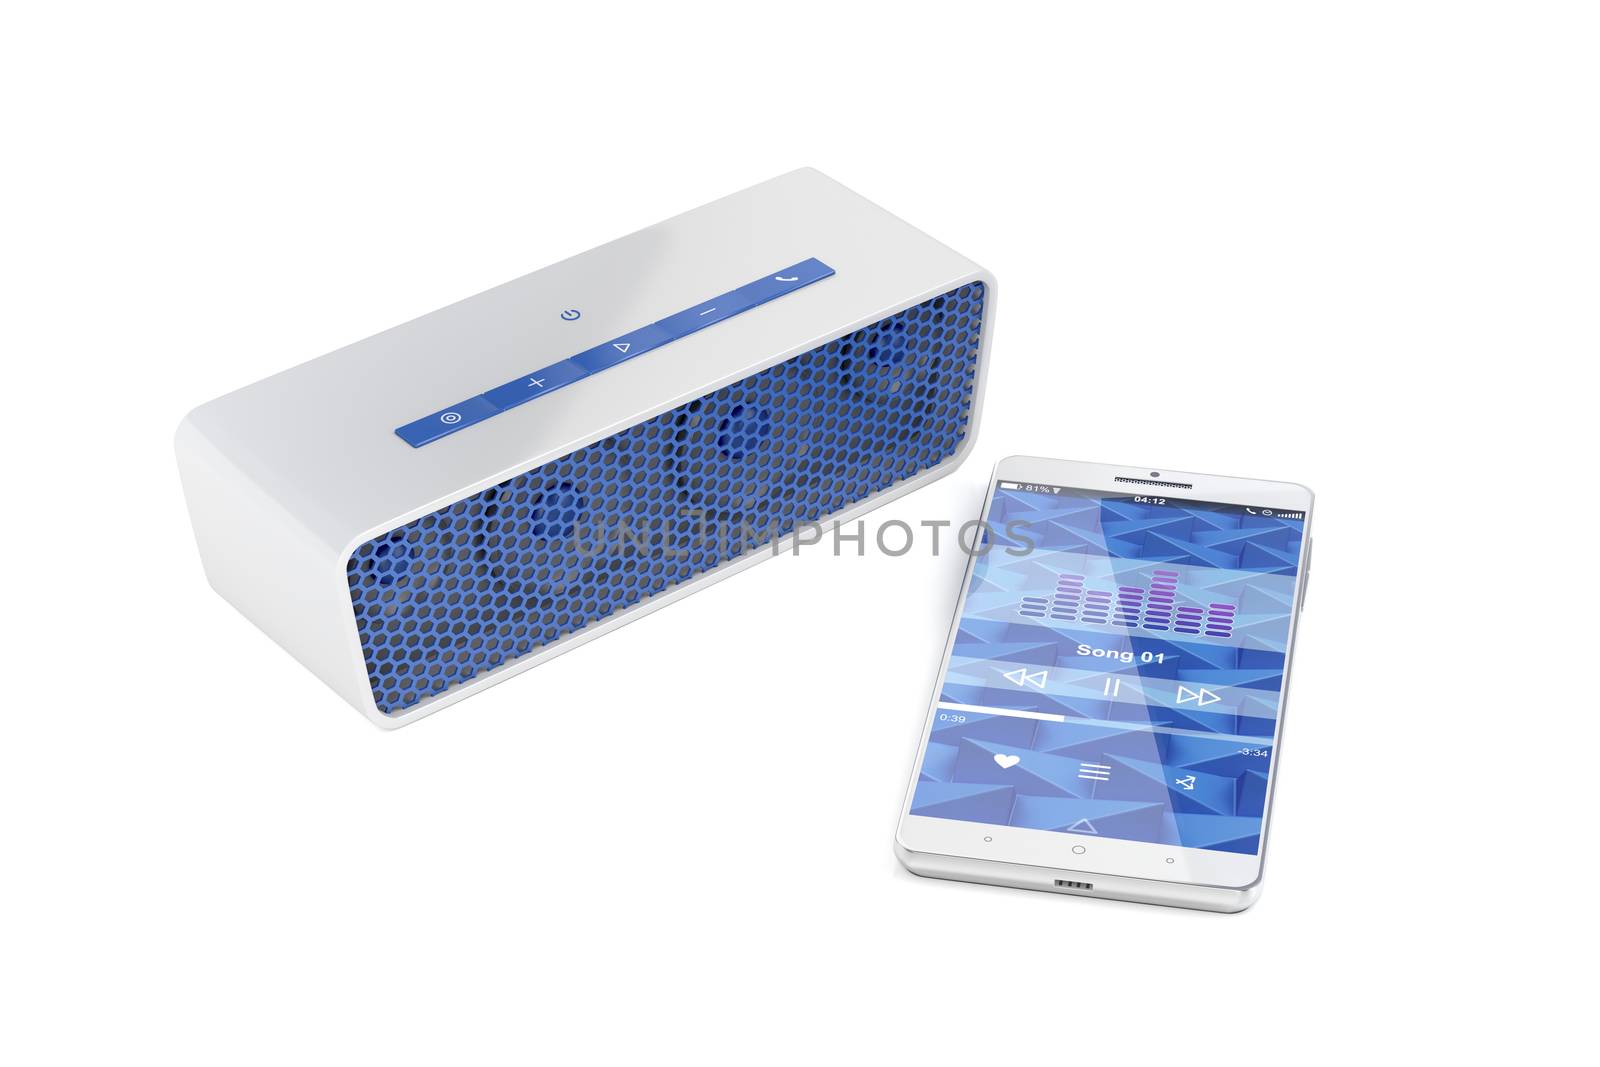 Playing music from smartphone on wireless portable speaker